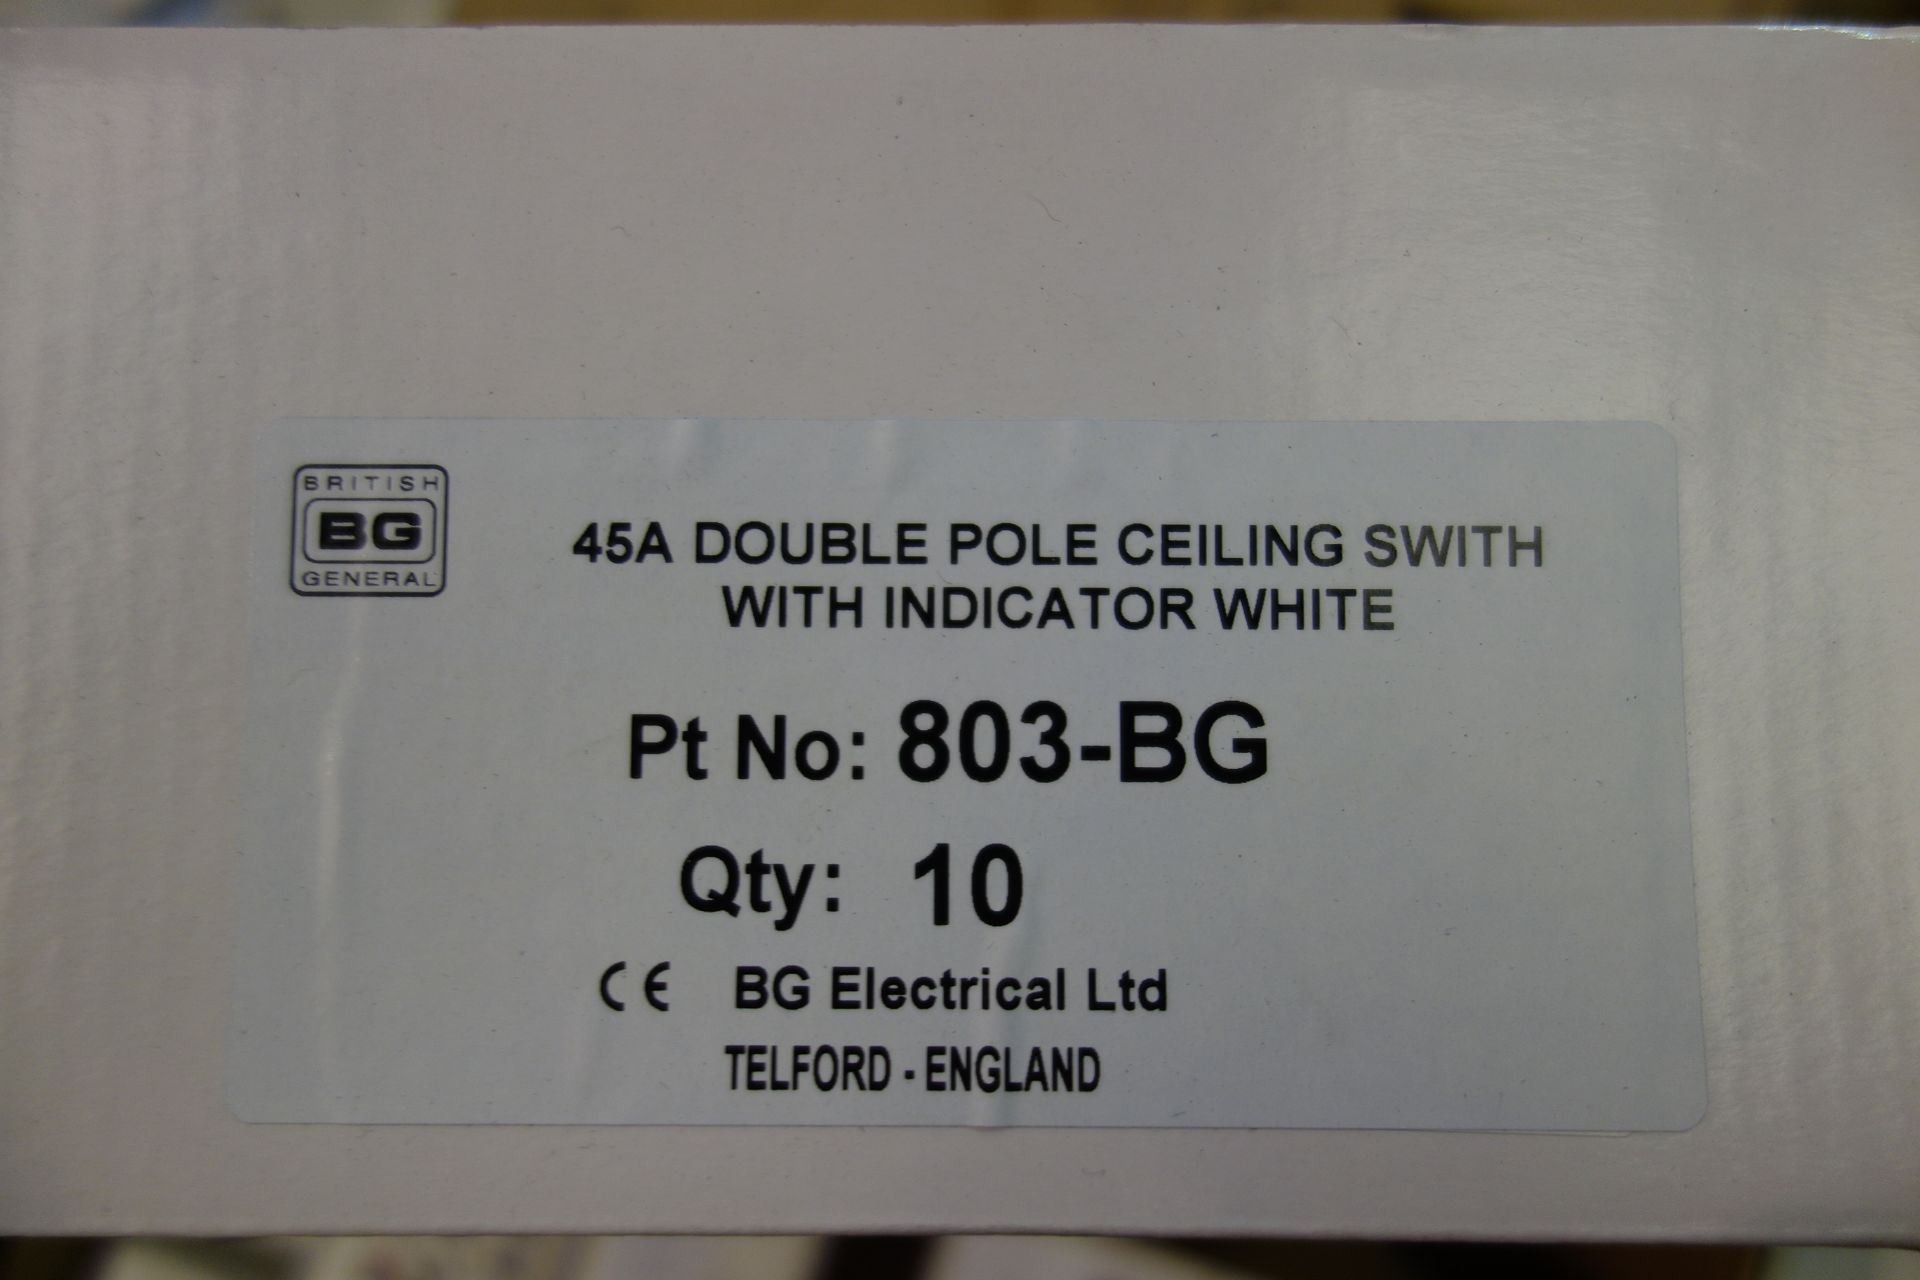 70 X British General 803-BG 45A Double Pole Ceiling Switch With Indicator Light White